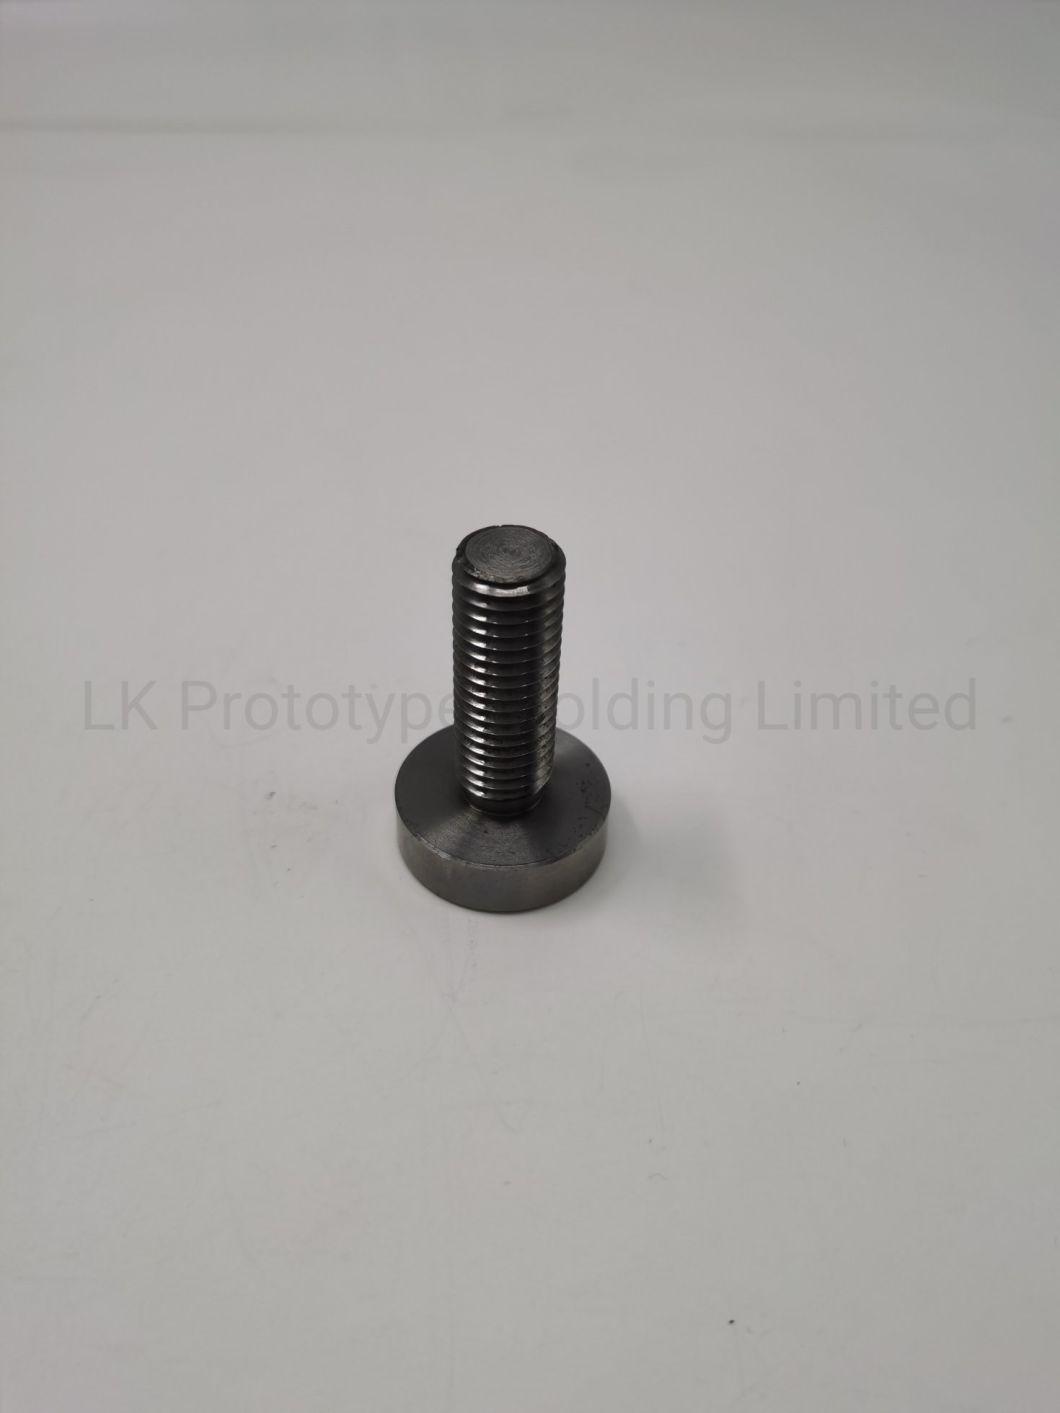 CNC Custom Stainless Steel Laser Cutting Metal Parts